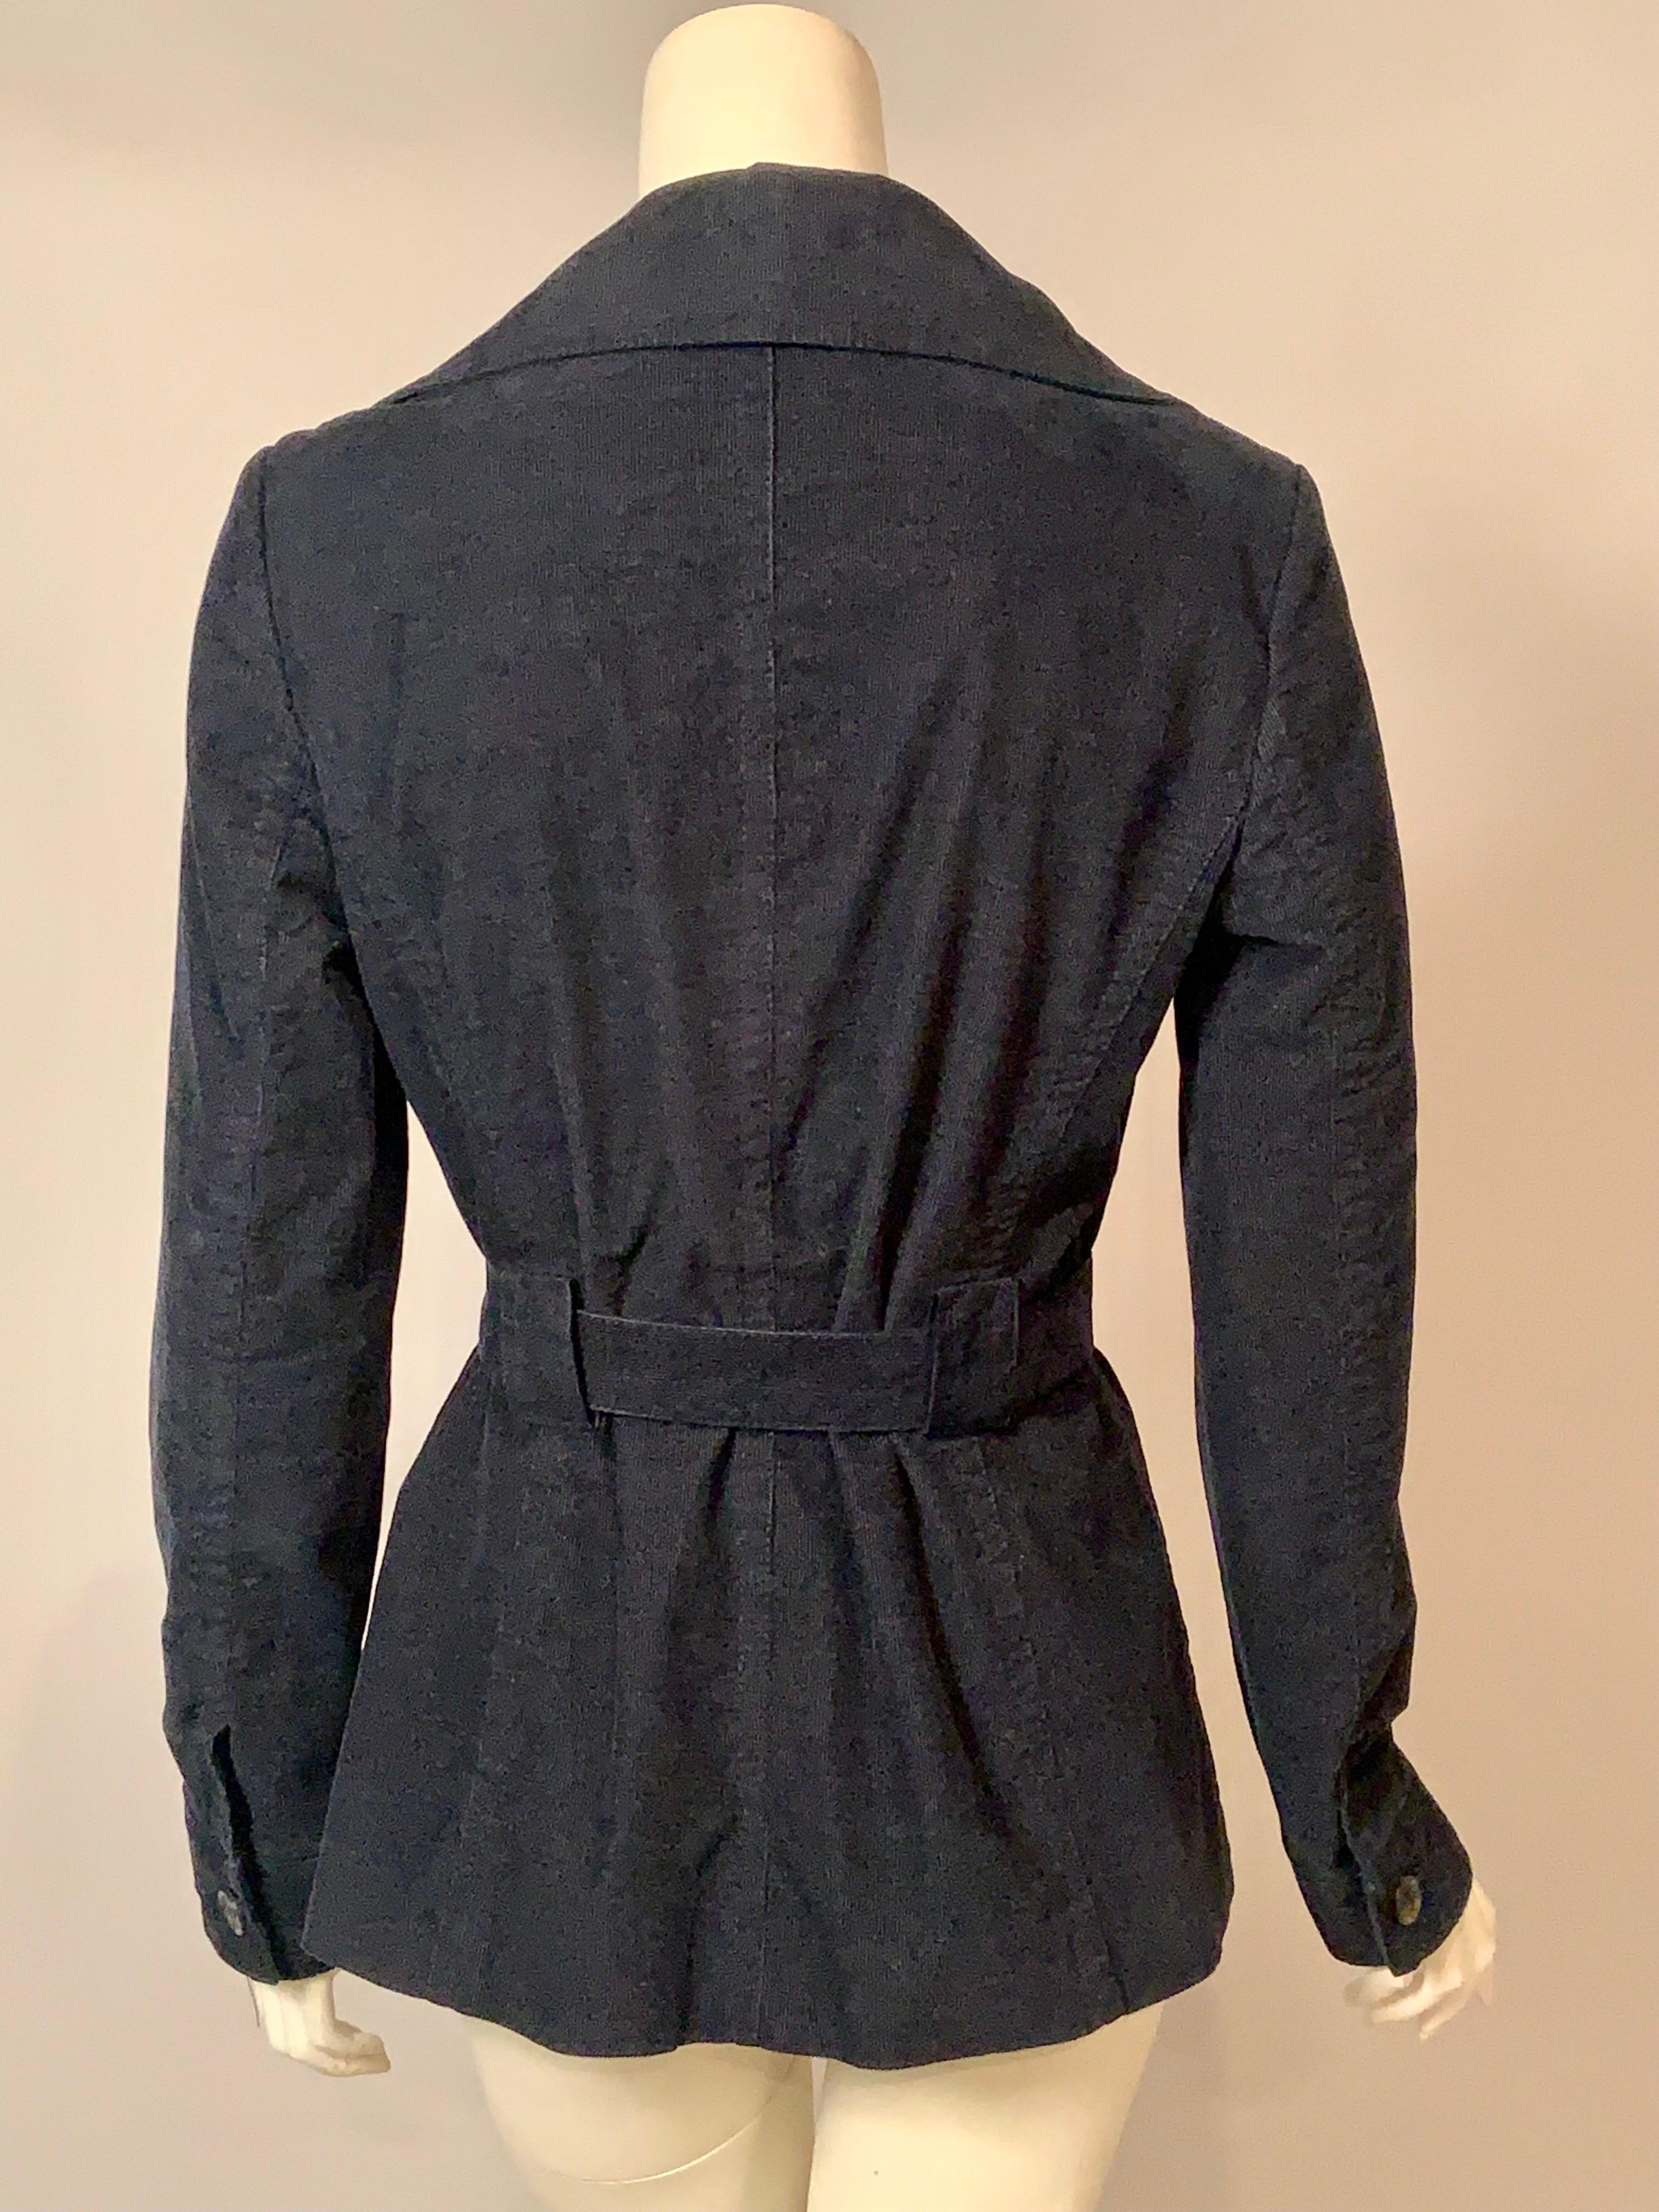 Women's R.E.D. Valentino Navy Blue Corduroy Belted Jacket with V Logo Snaps on Pockets